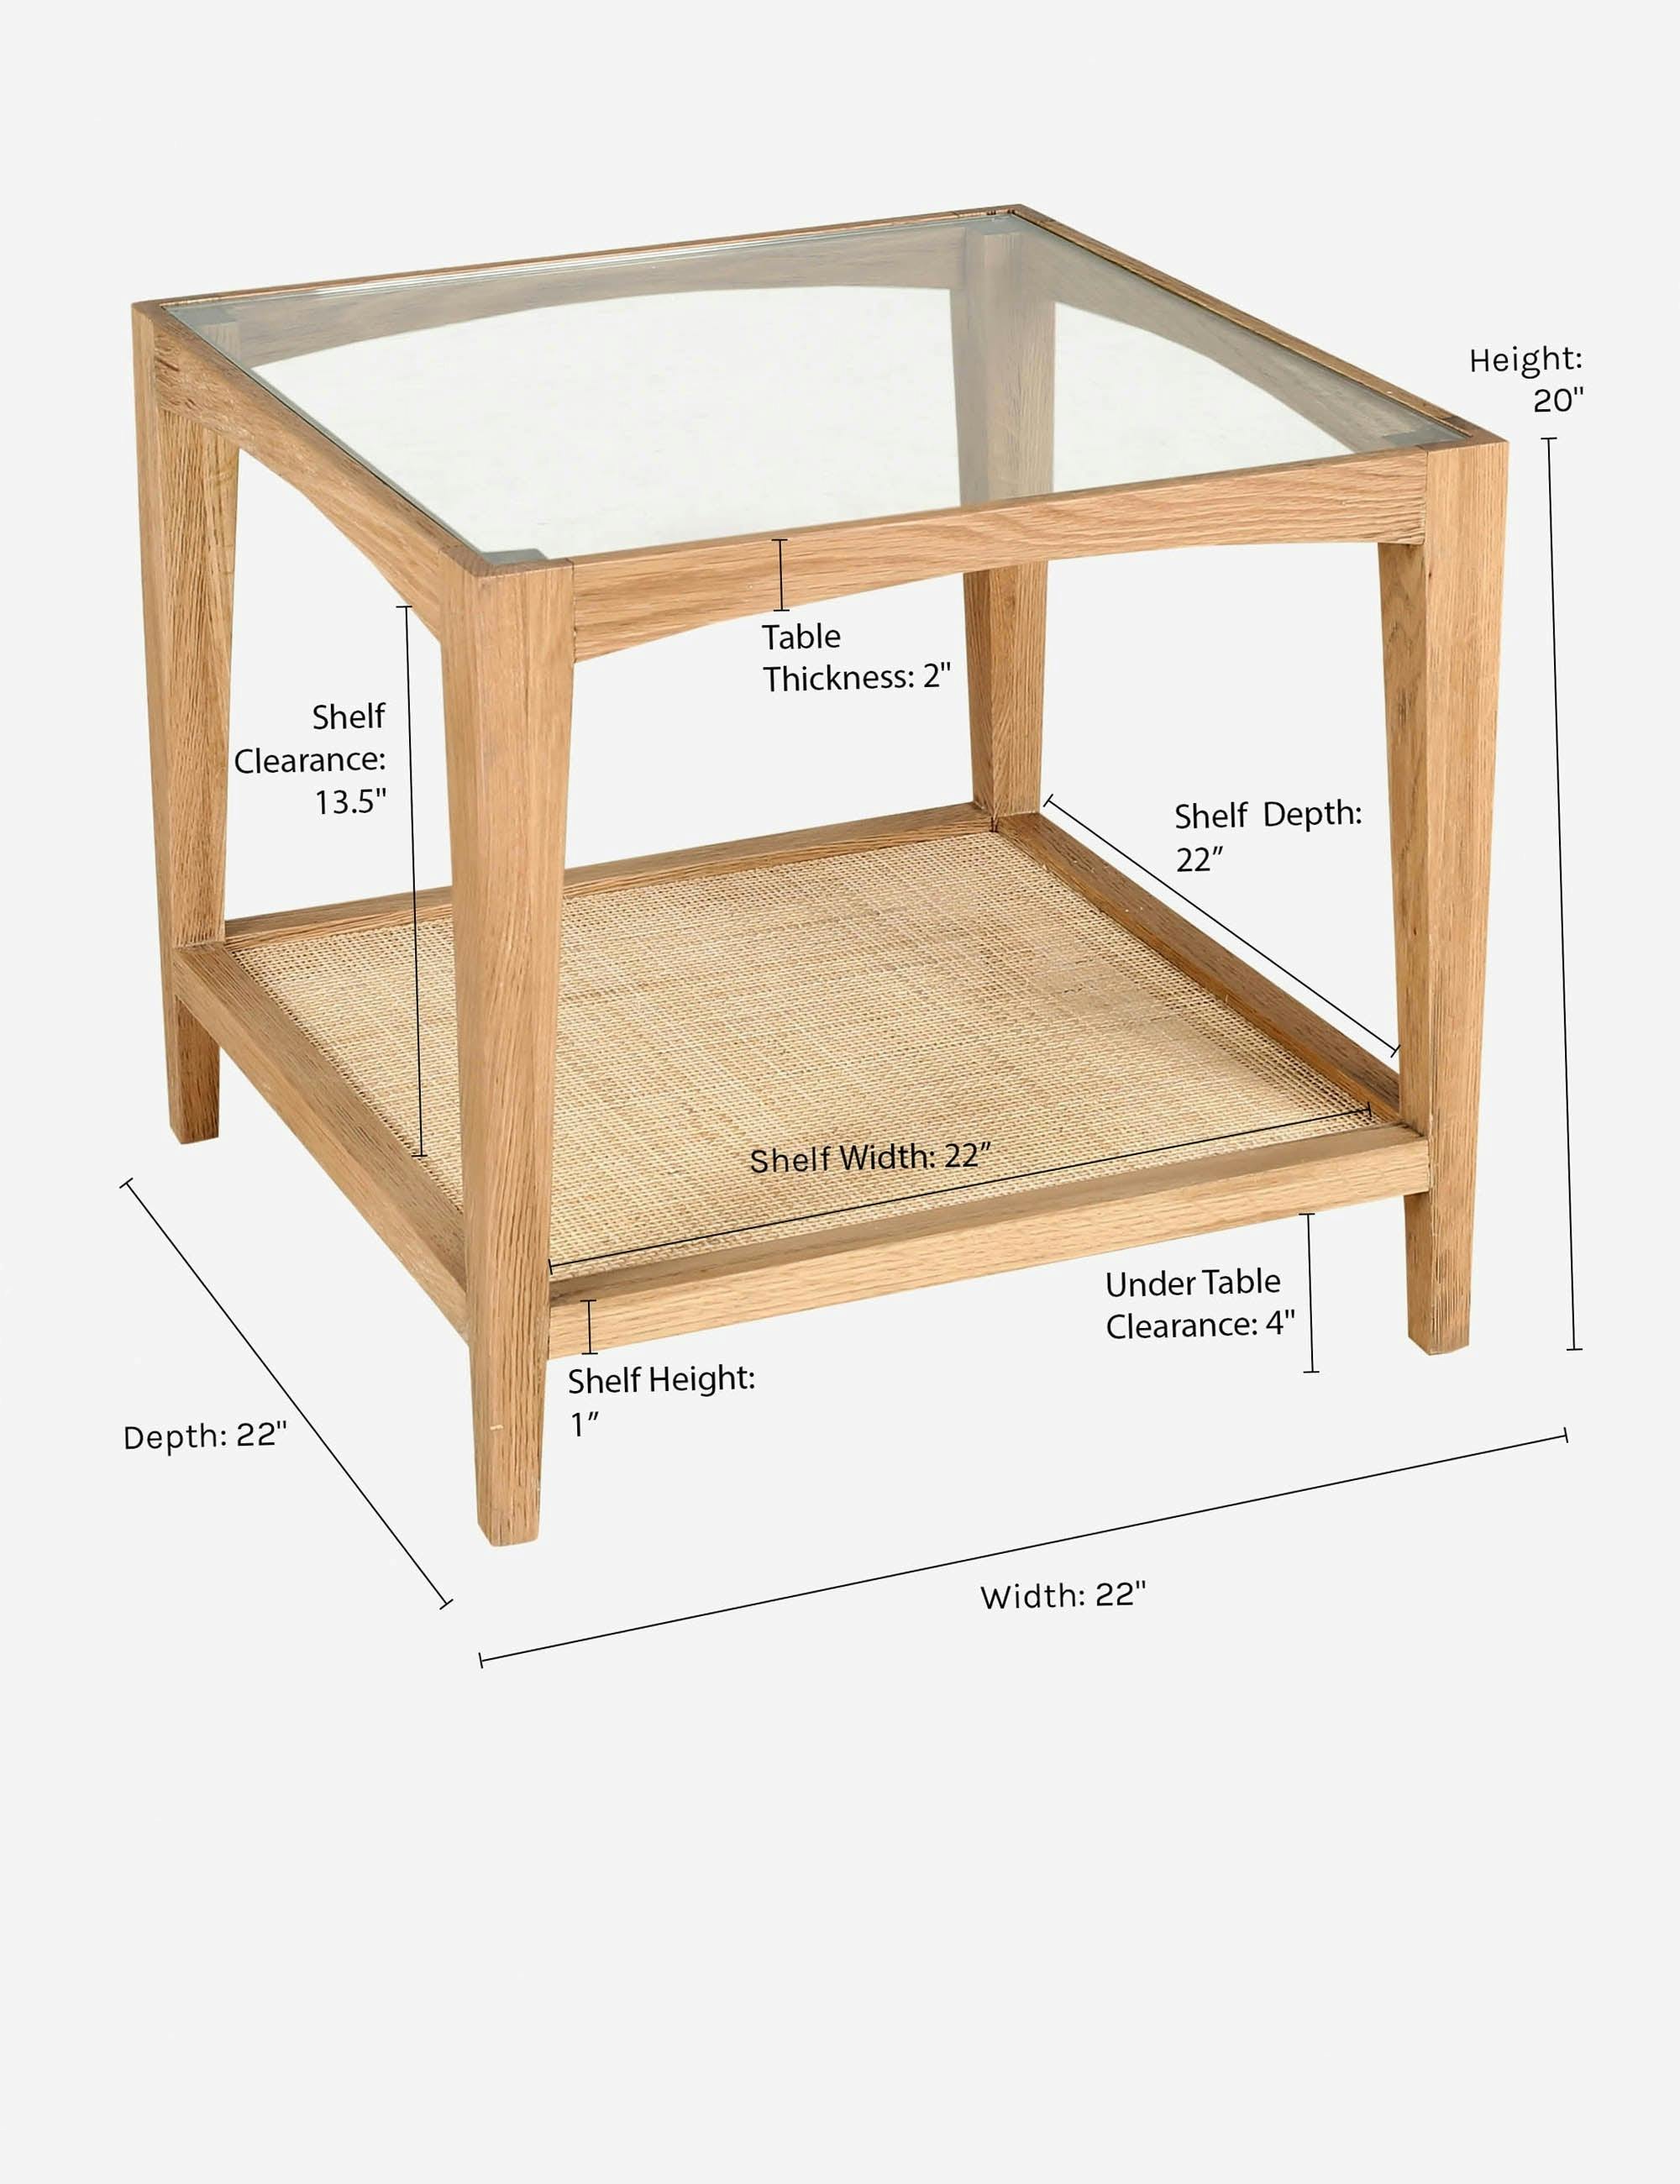 Natural Oak and Tempered Glass Side Table with Cane Shelf